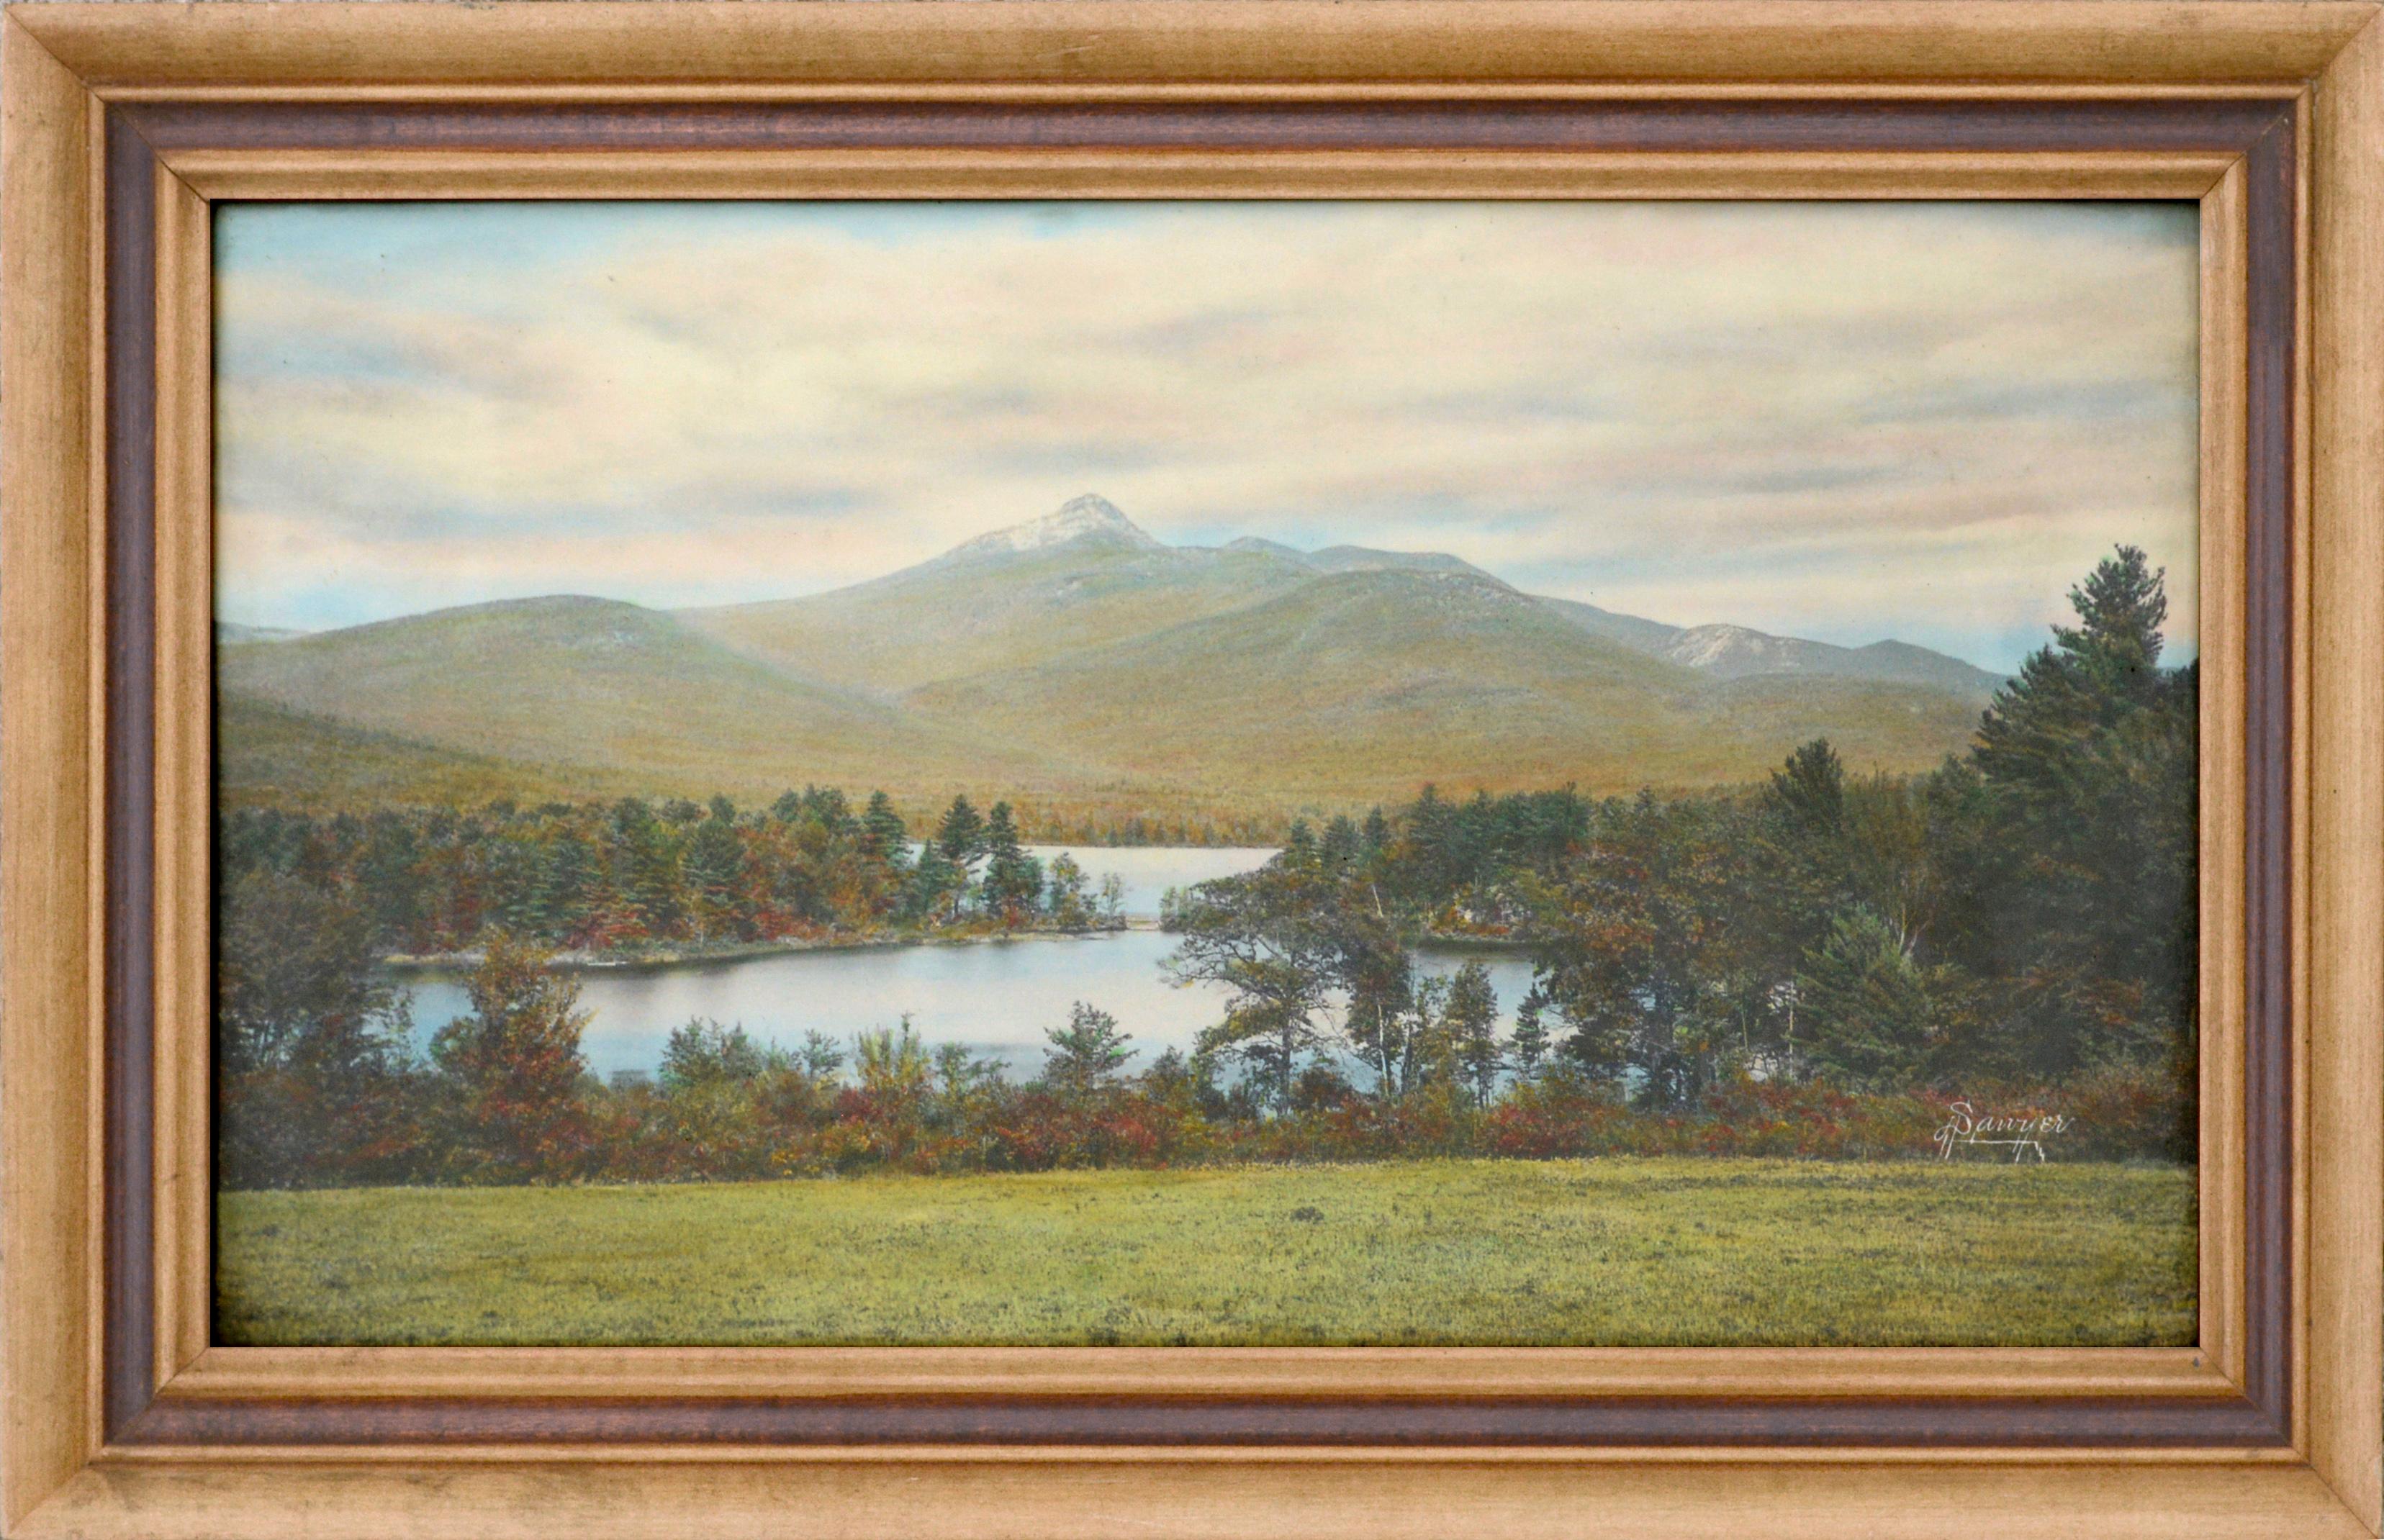 Charles Henry Sawyer Landscape Art - Early 20th Century Hand Colored Landscape Photograph of Mt. Chocoura, NH